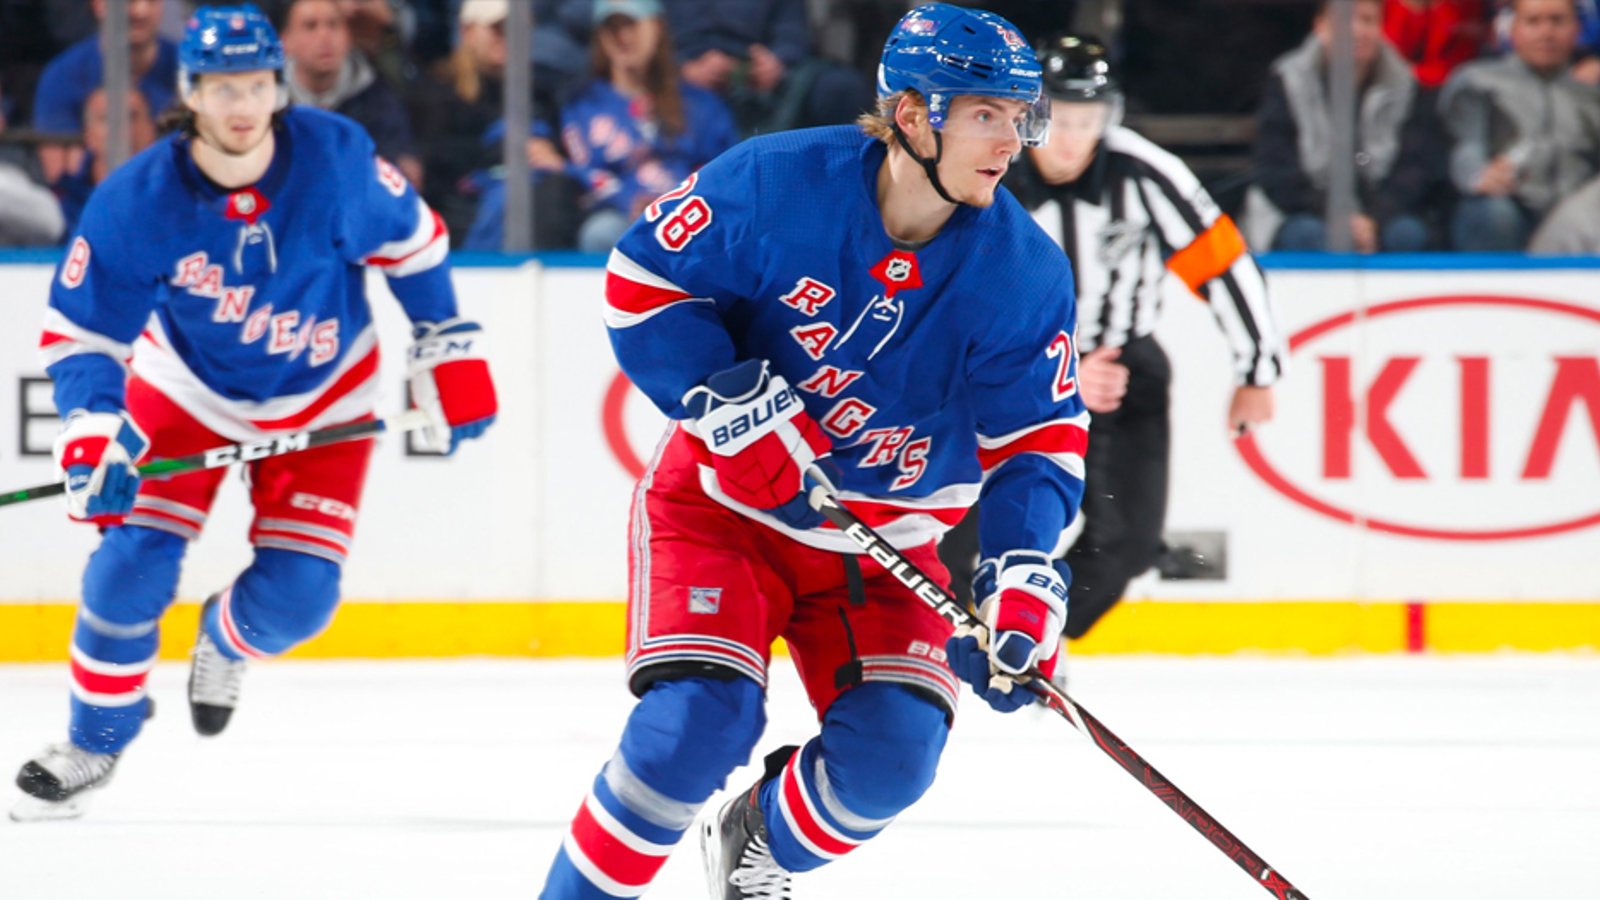 Lias Andersson staying in Sweden, won’t return to Rangers organization